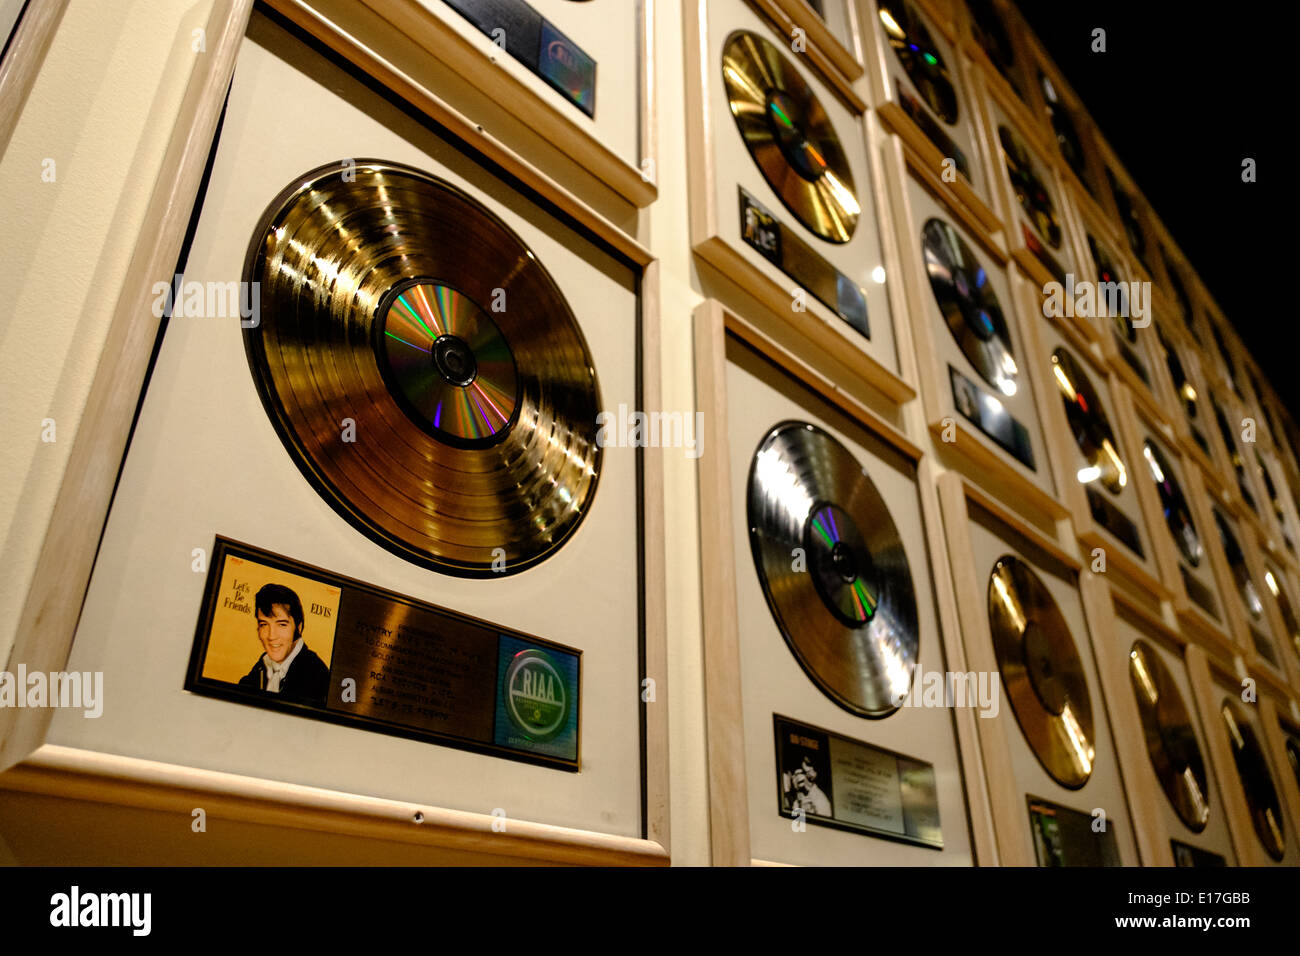 Disque d'Or Elvis Presley au Country Music Hall of Fame à Nashville, Tennessee Banque D'Images